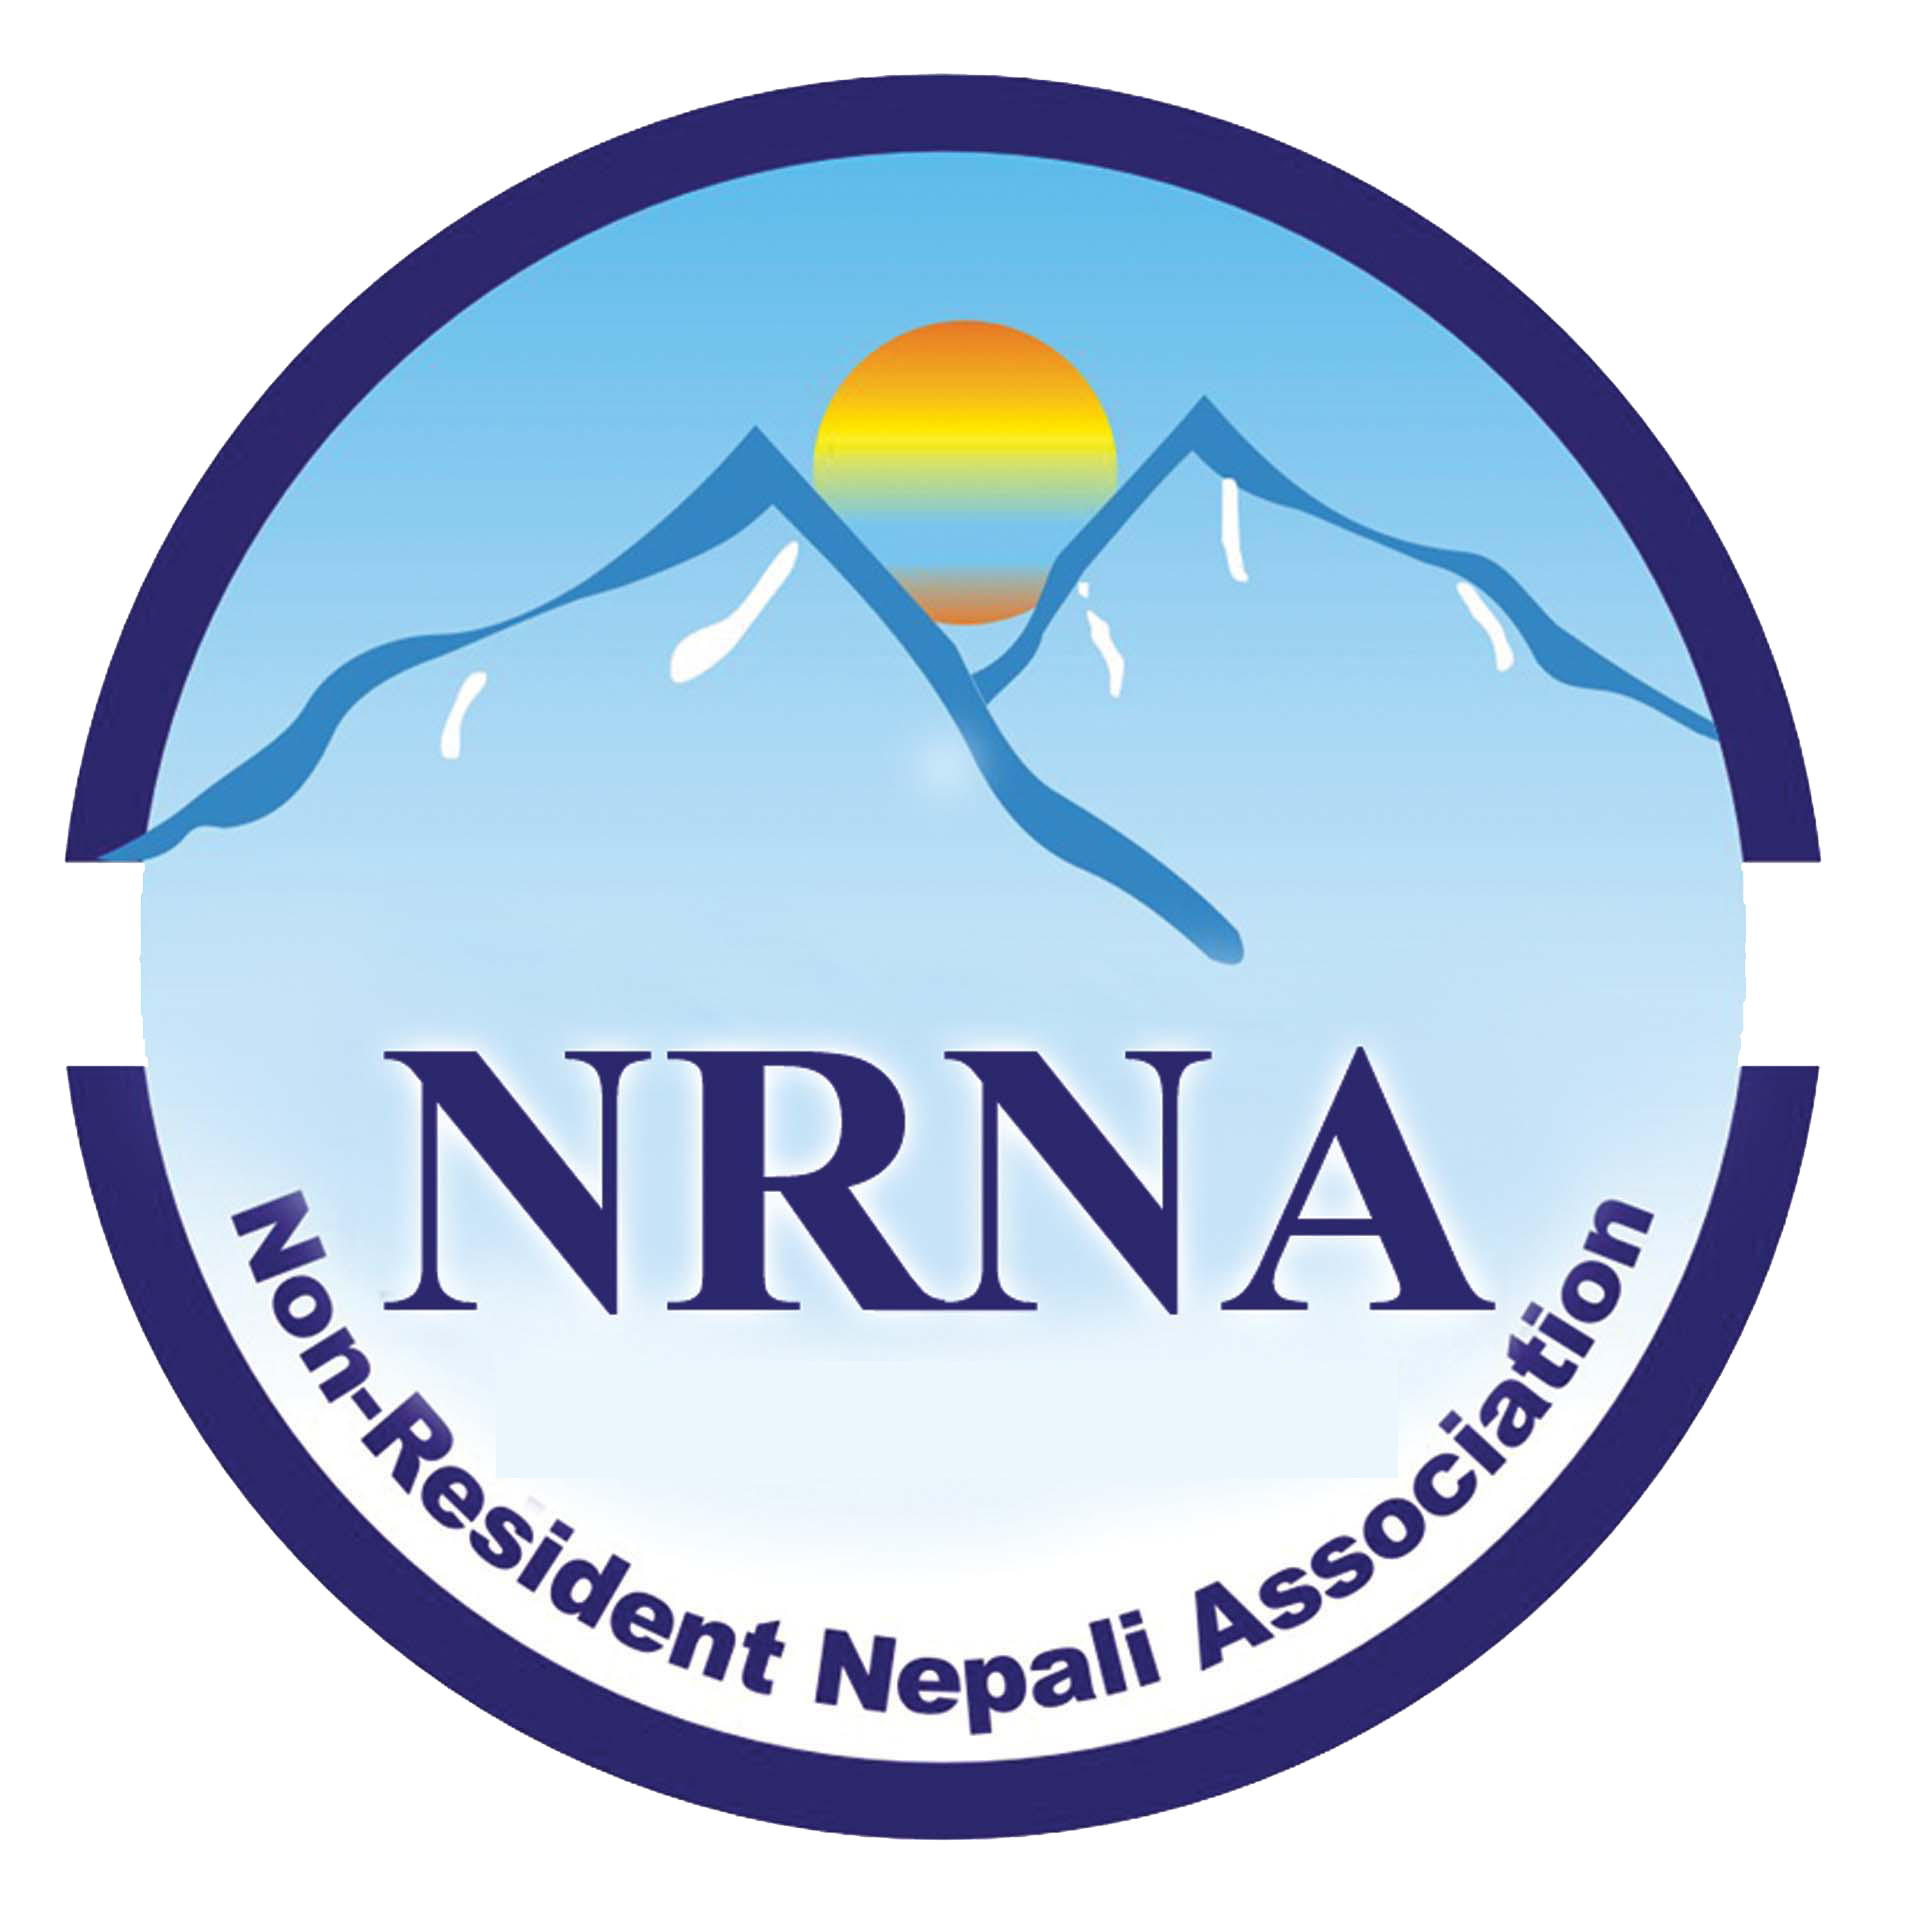 NRNA urges government to rescue Nepalis stranded abroad free of cost